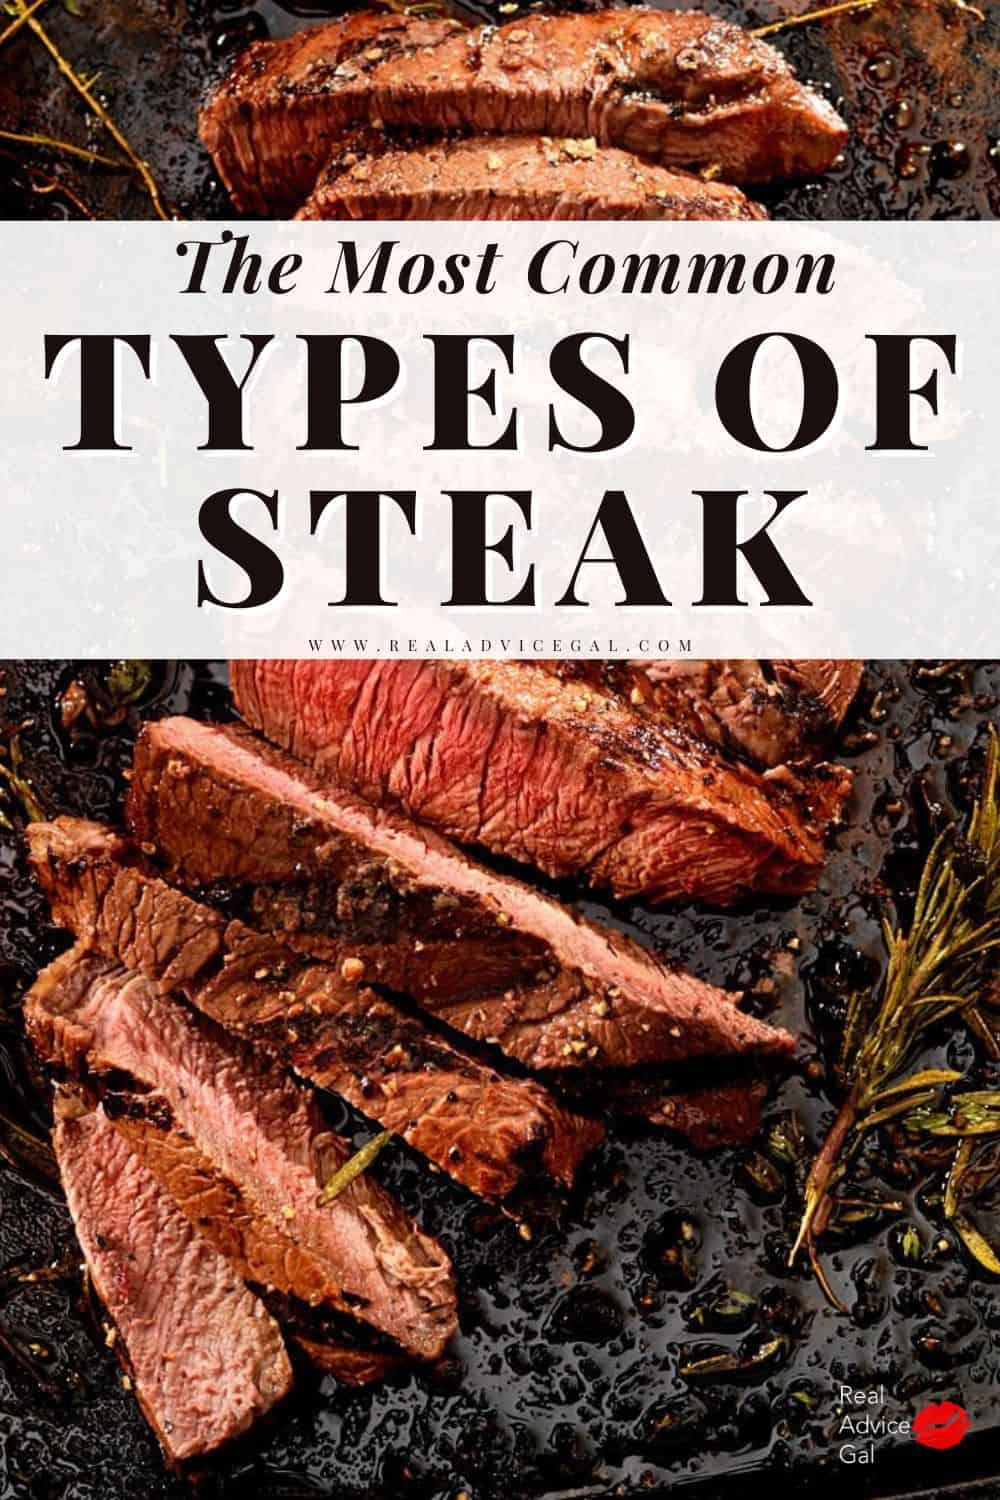 The most common types of steak